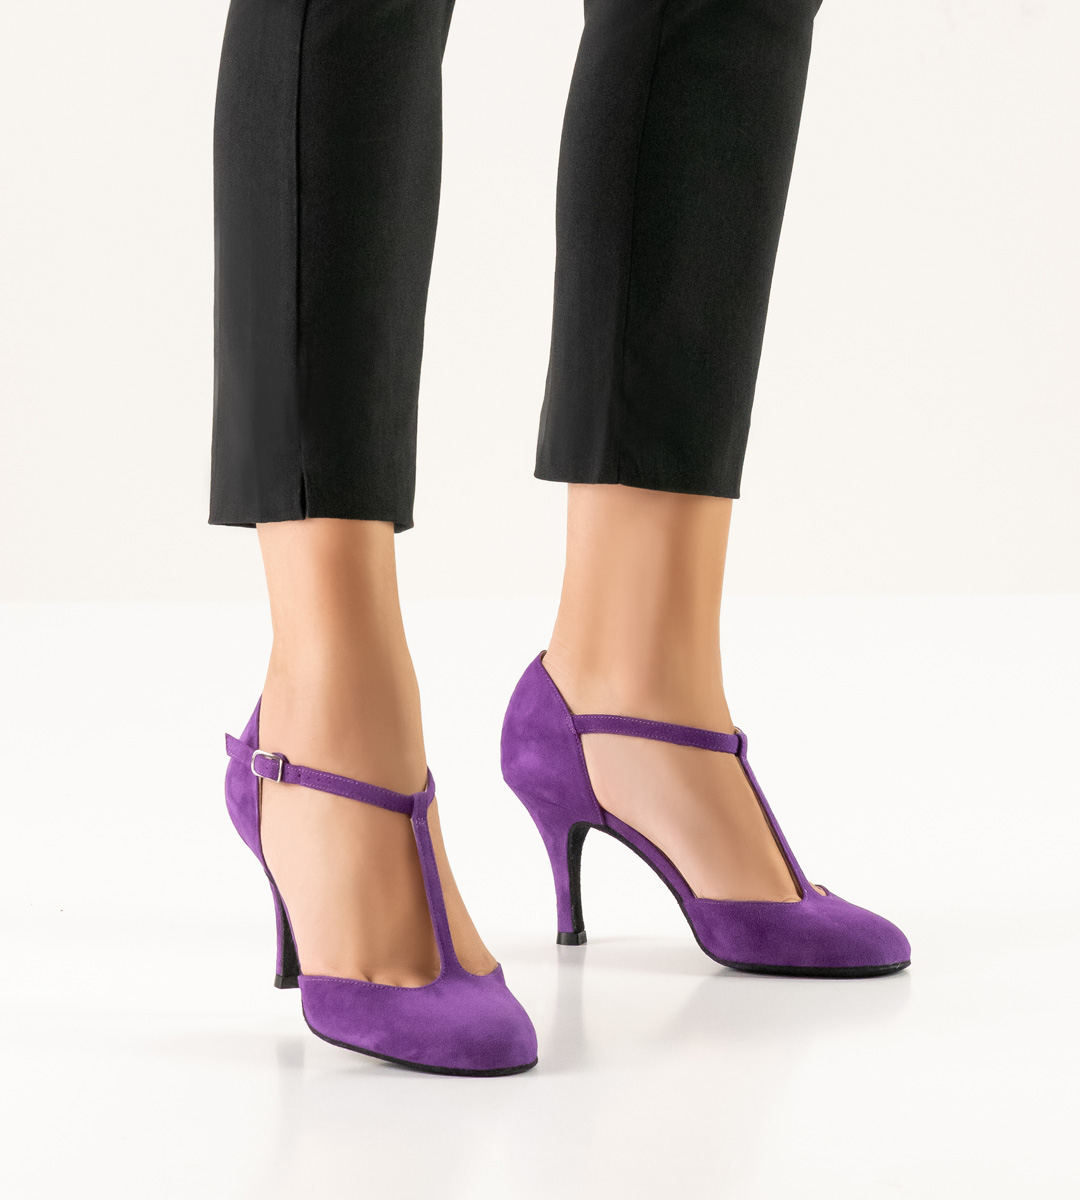 Ladies' closed dance shoe by Nueva Epoca in combination with black trousers